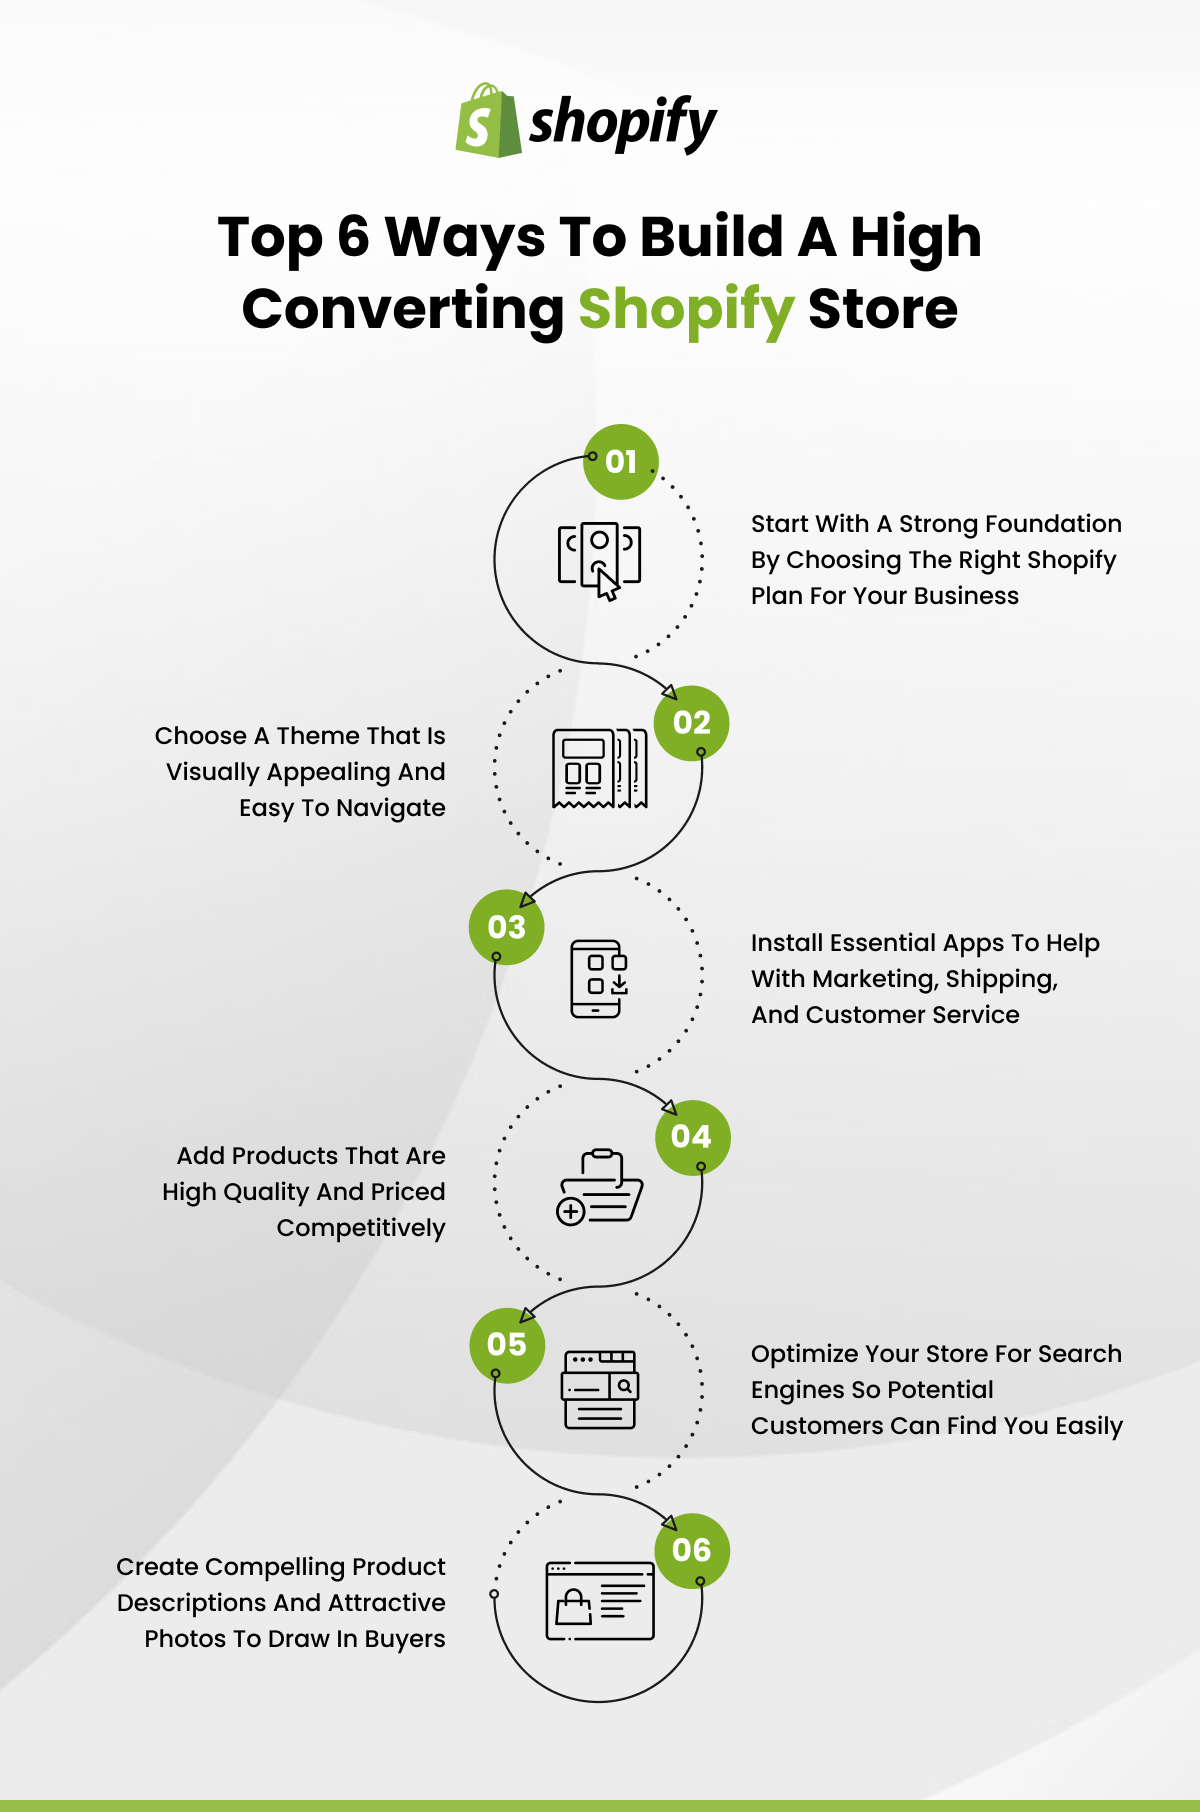 Top 6 Ways to build a high converting shopify store